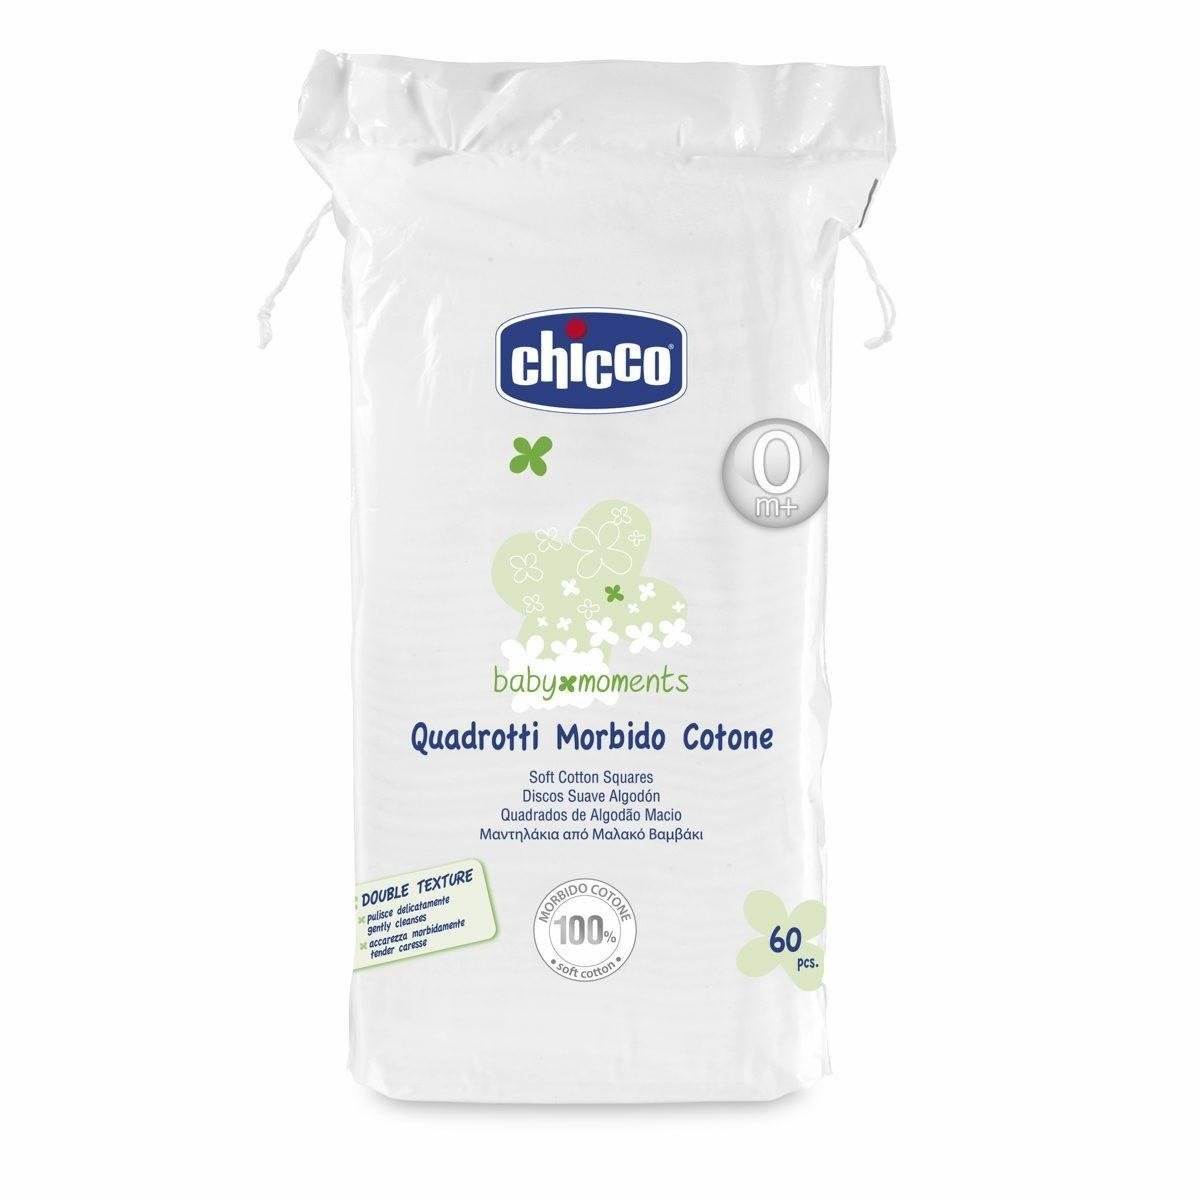 Soft cotton wipes for babies